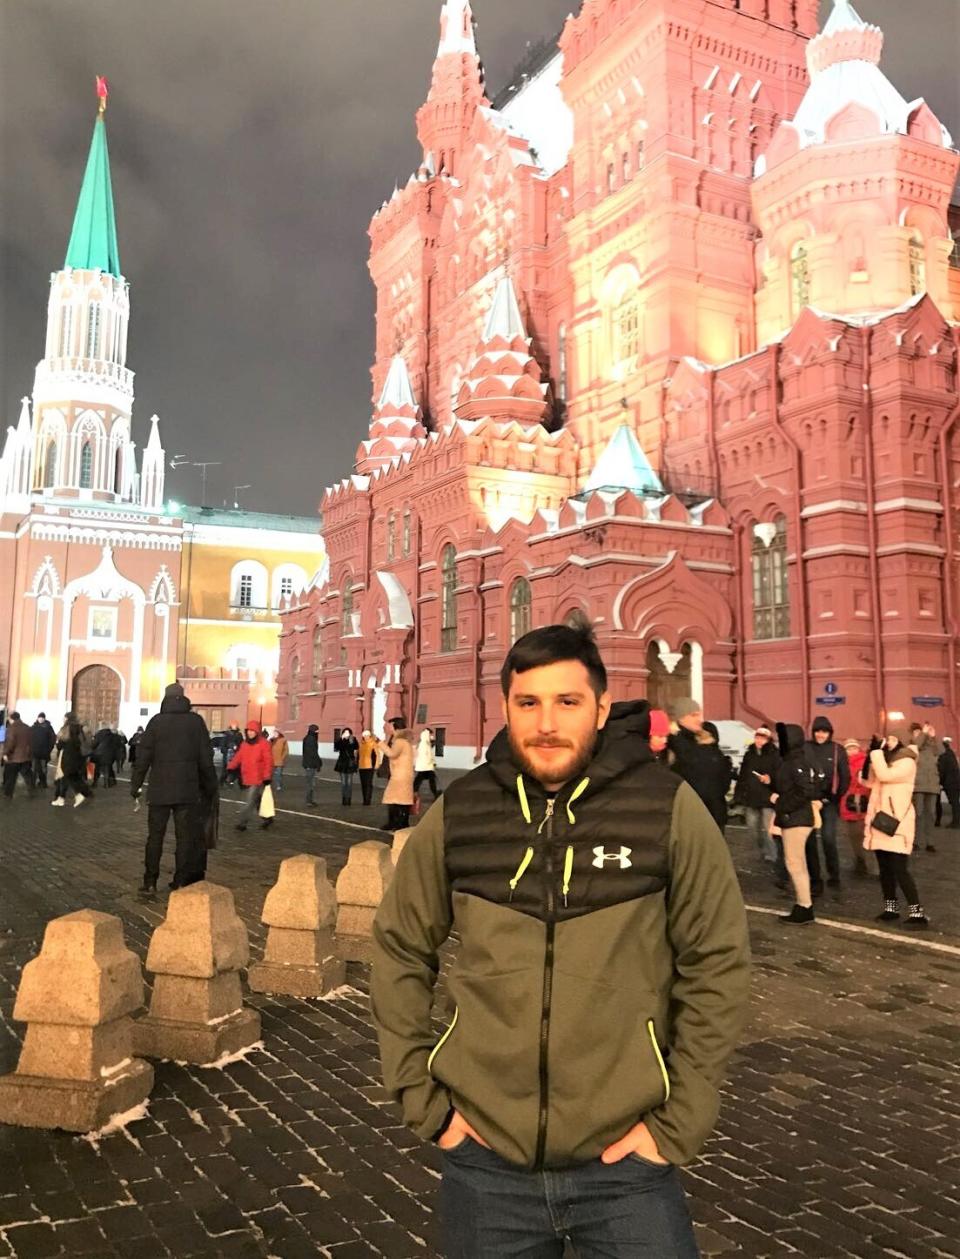 This 2018 image provided by the Reed family shows Trevor Reed at Red Square in Moscow, Russia. Russia is holding Marine veteran Trevor Reed, who was sentenced to nine years on charges he assaulted a police officer. (Reed Family via AP)